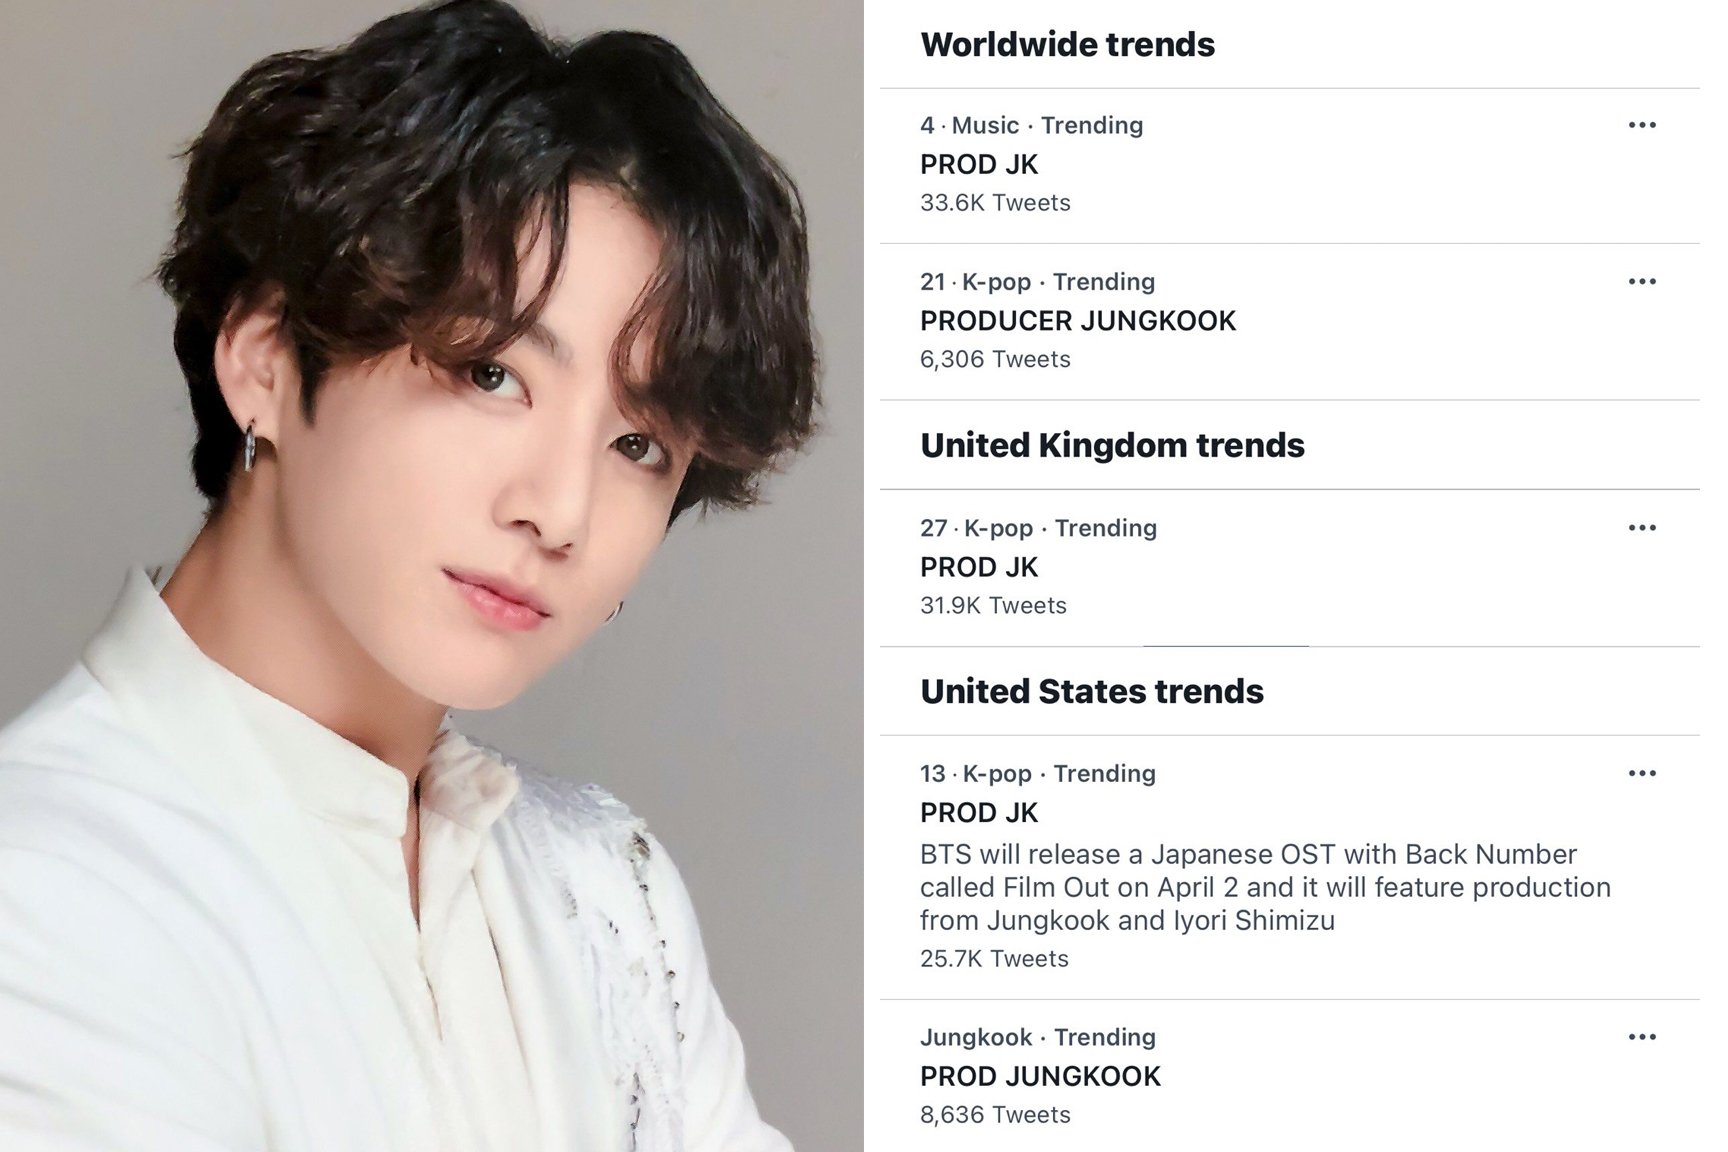 Producer Jungkook trends worldwide on Twitter as it is announced that BTS  will release a Japanese OST produced by Jungkook | allkpop